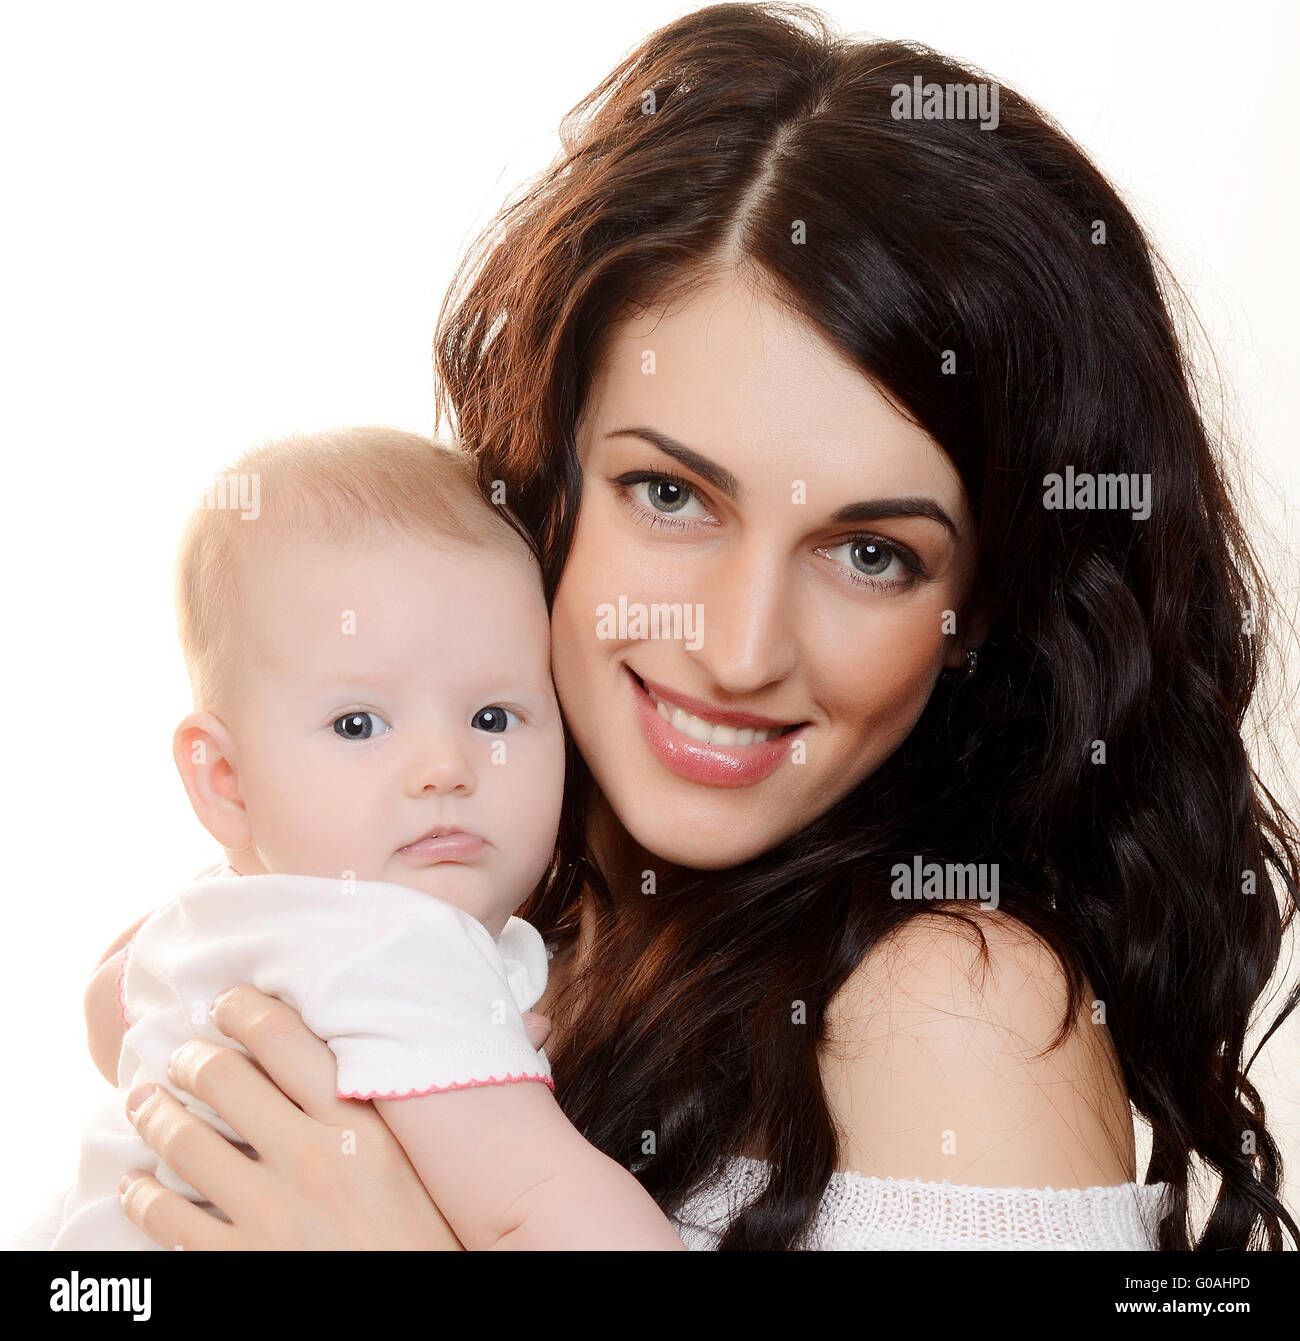 The happy mother with baby on white background Stock Photo